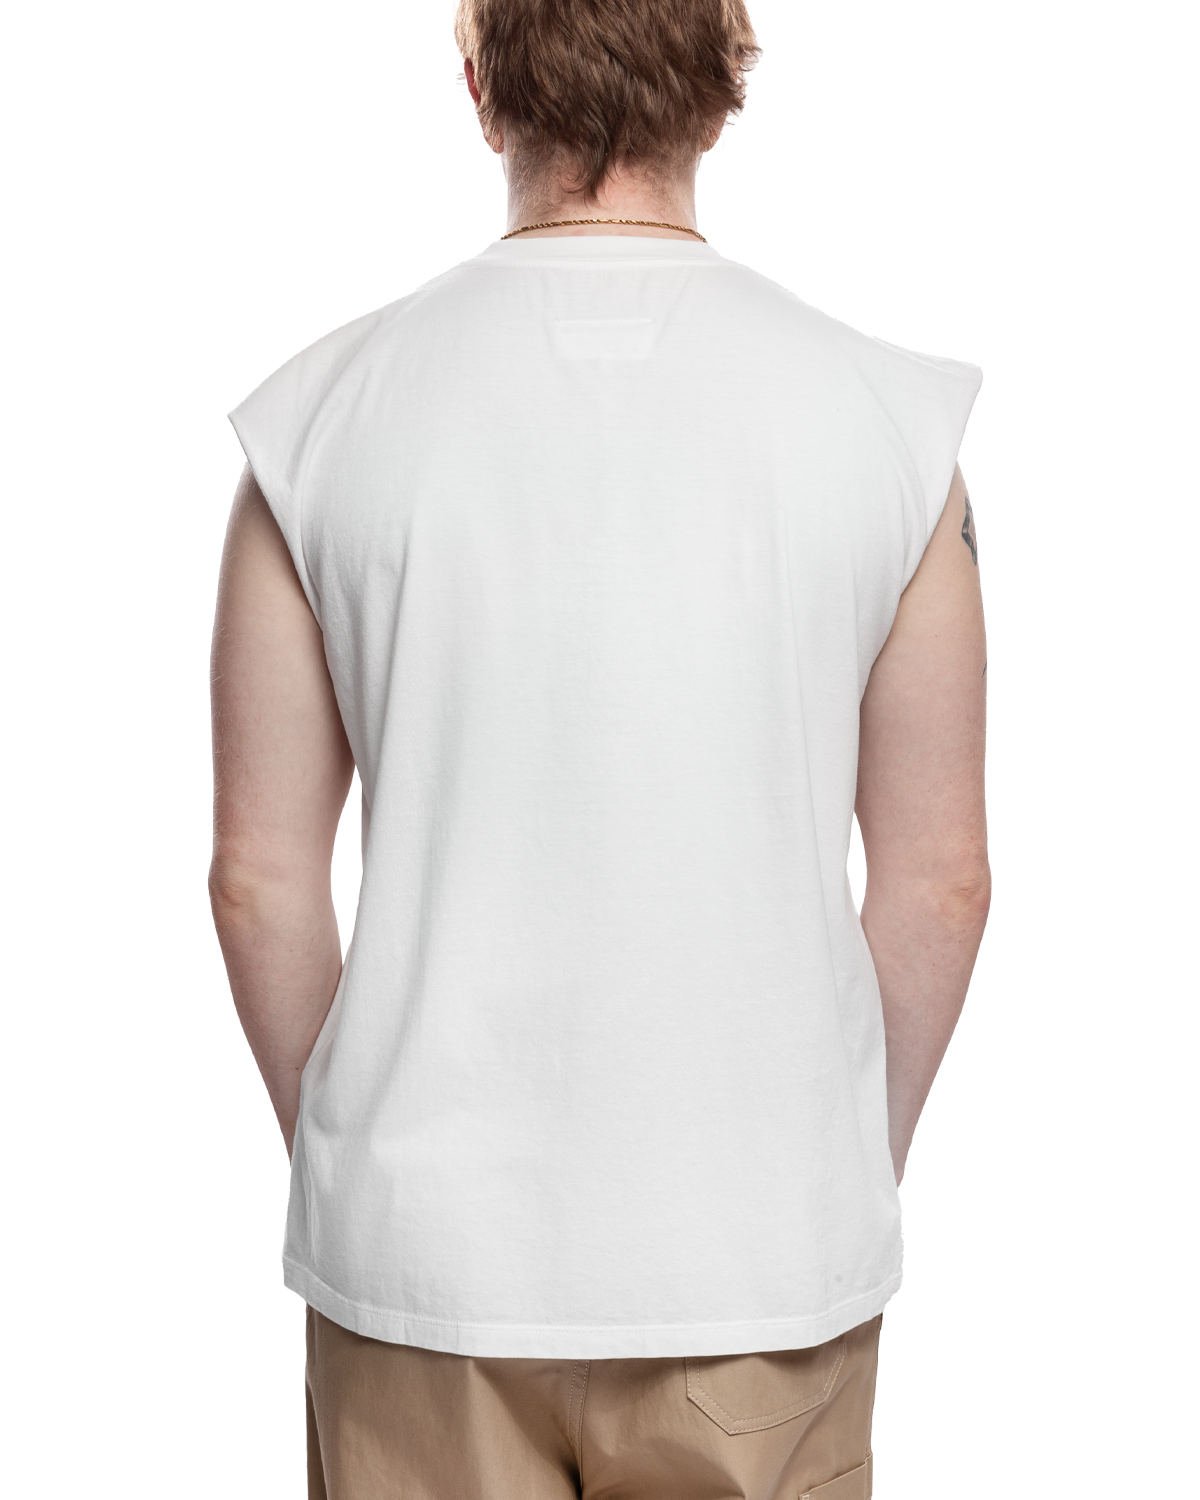 White Rolled Edge Tank Top